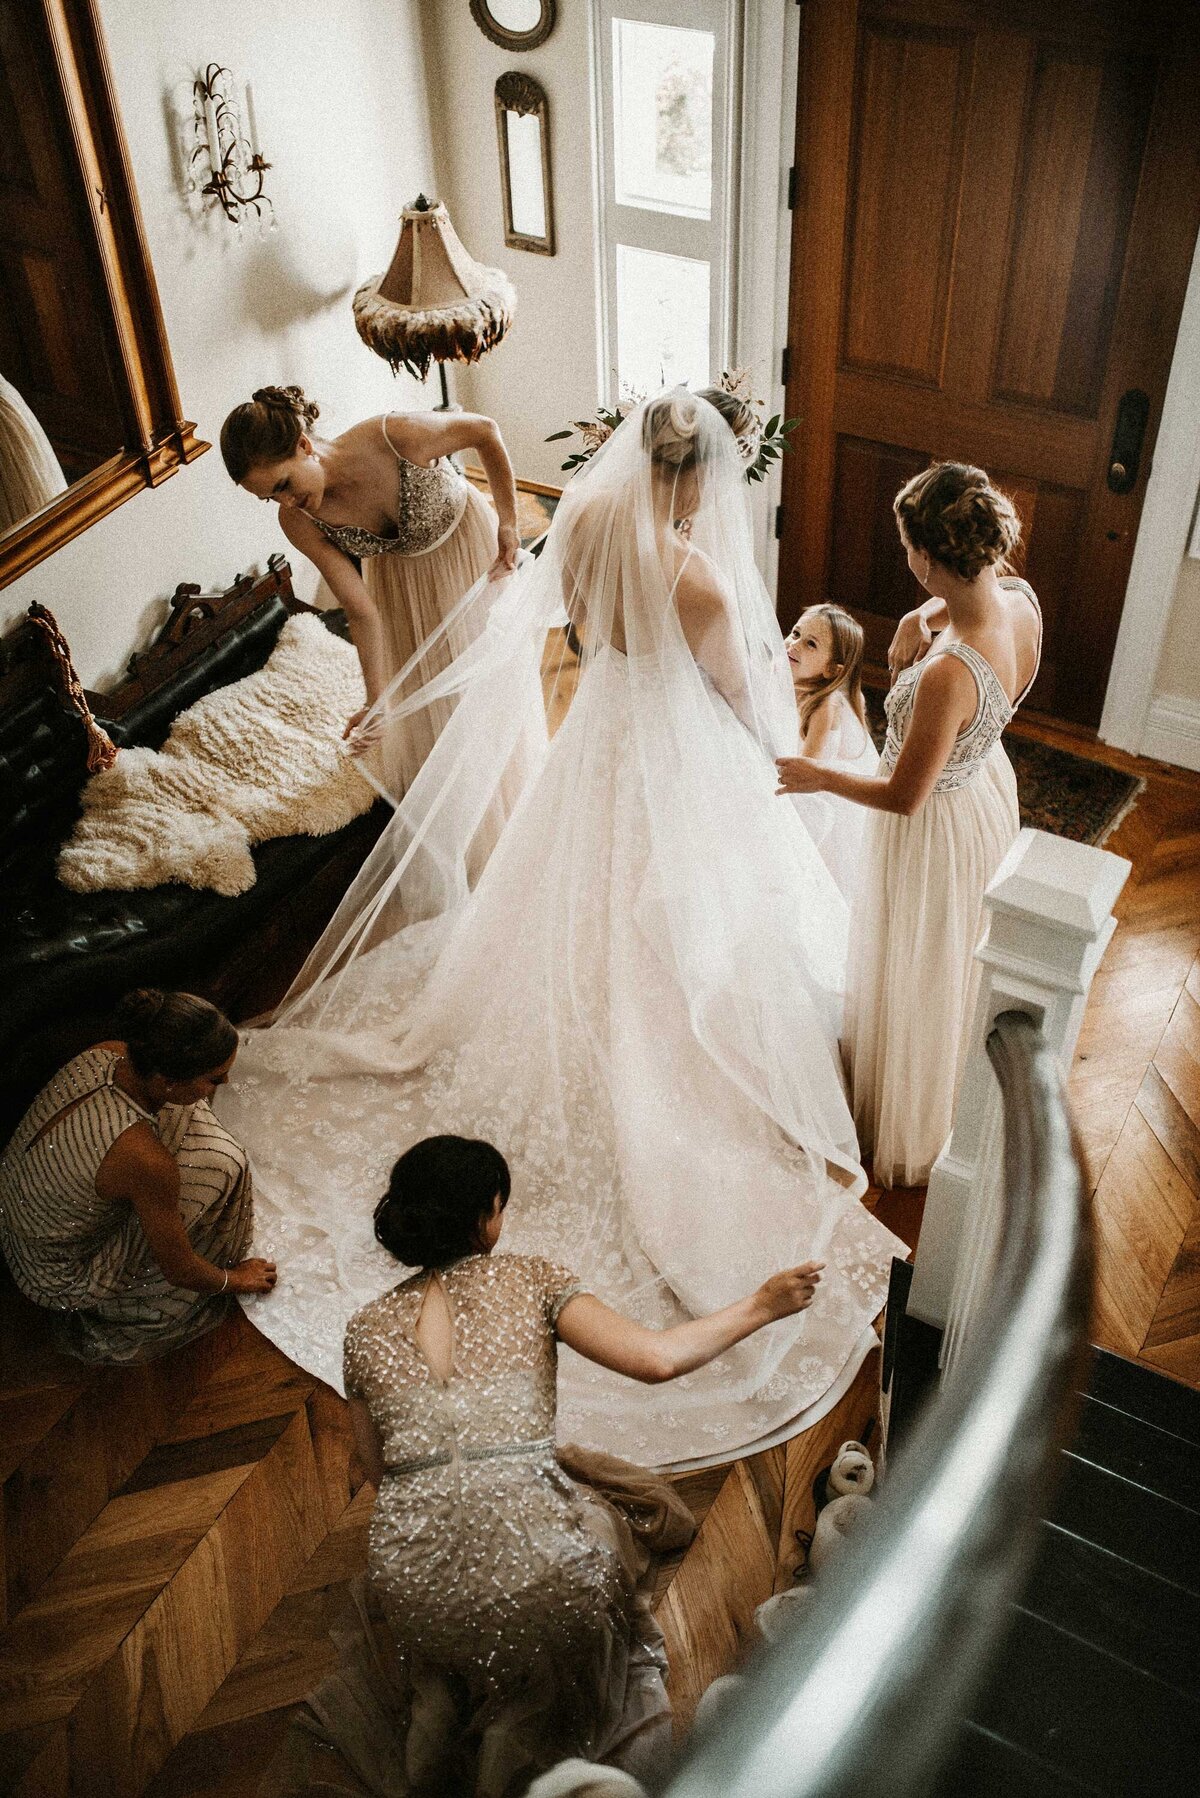 bride-and-bridesmaids-getting-ready-in-mansion-st-louis-missouri